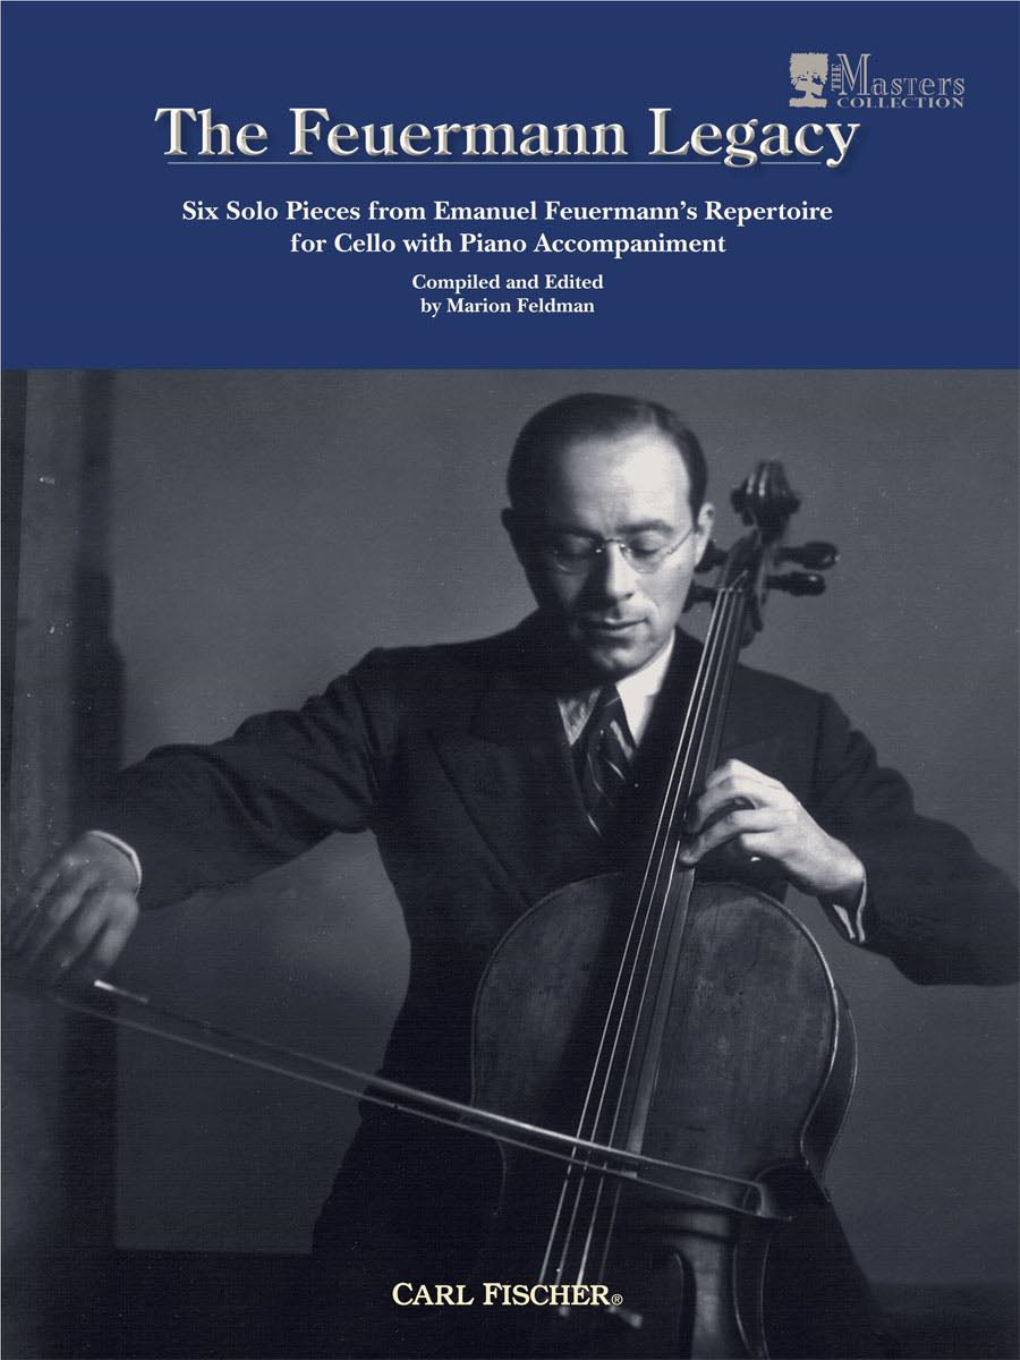 Six Solo Pieces from Emanuel Feuermann's Repertoire for Cello